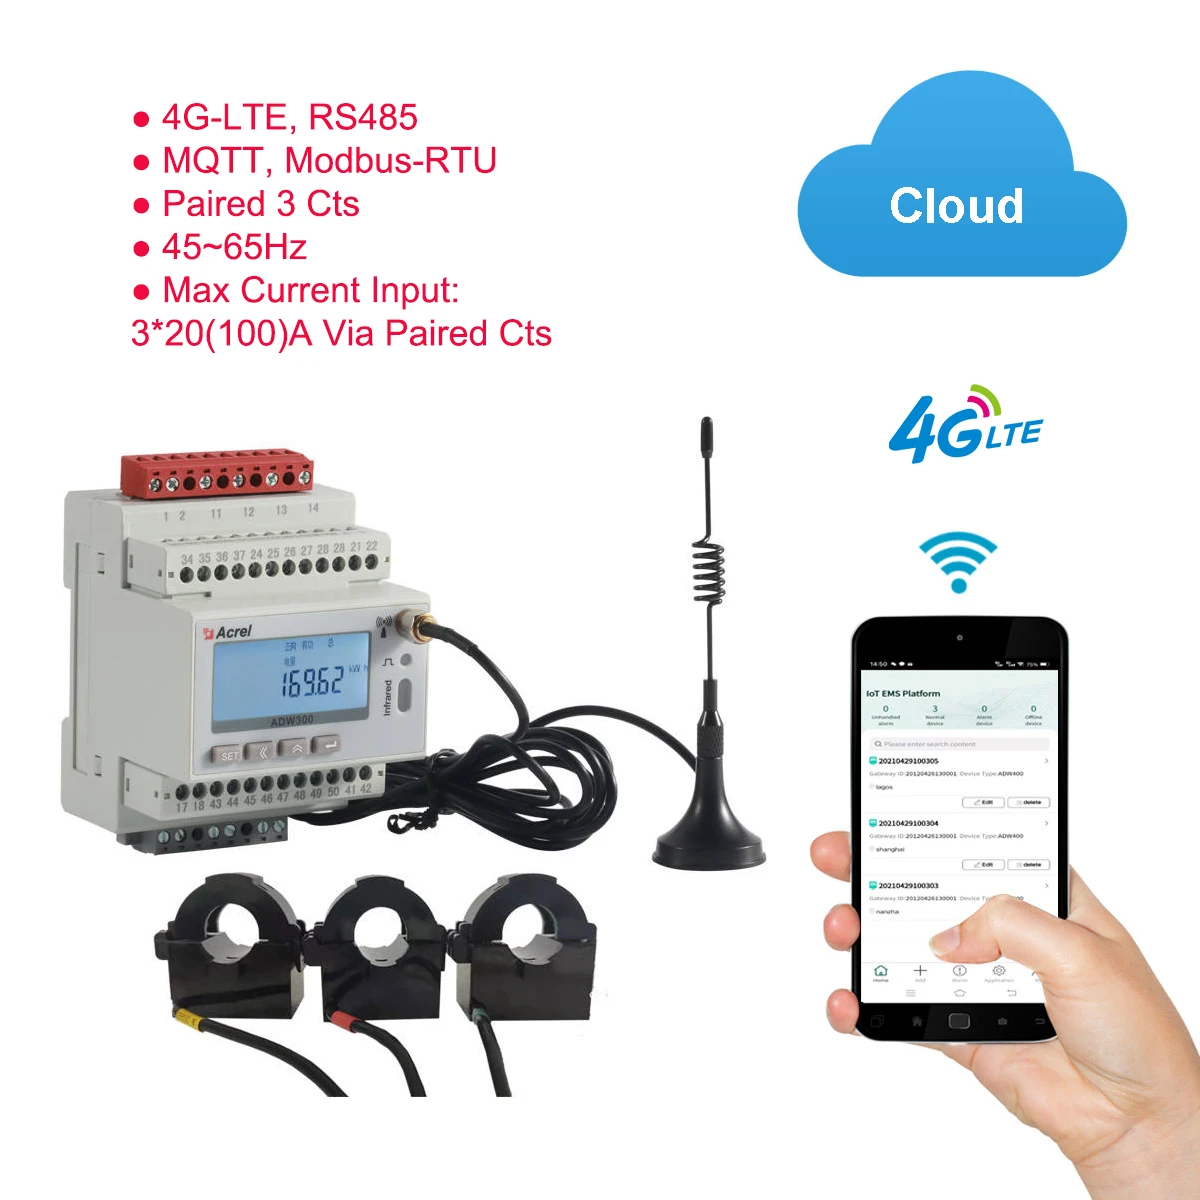 

Voltmeter Ammeter Power Measure 4G Wireless 3-Phase Smart Energy Meter Rs485 Modbus-RTU with 3 Current Transformer Paired